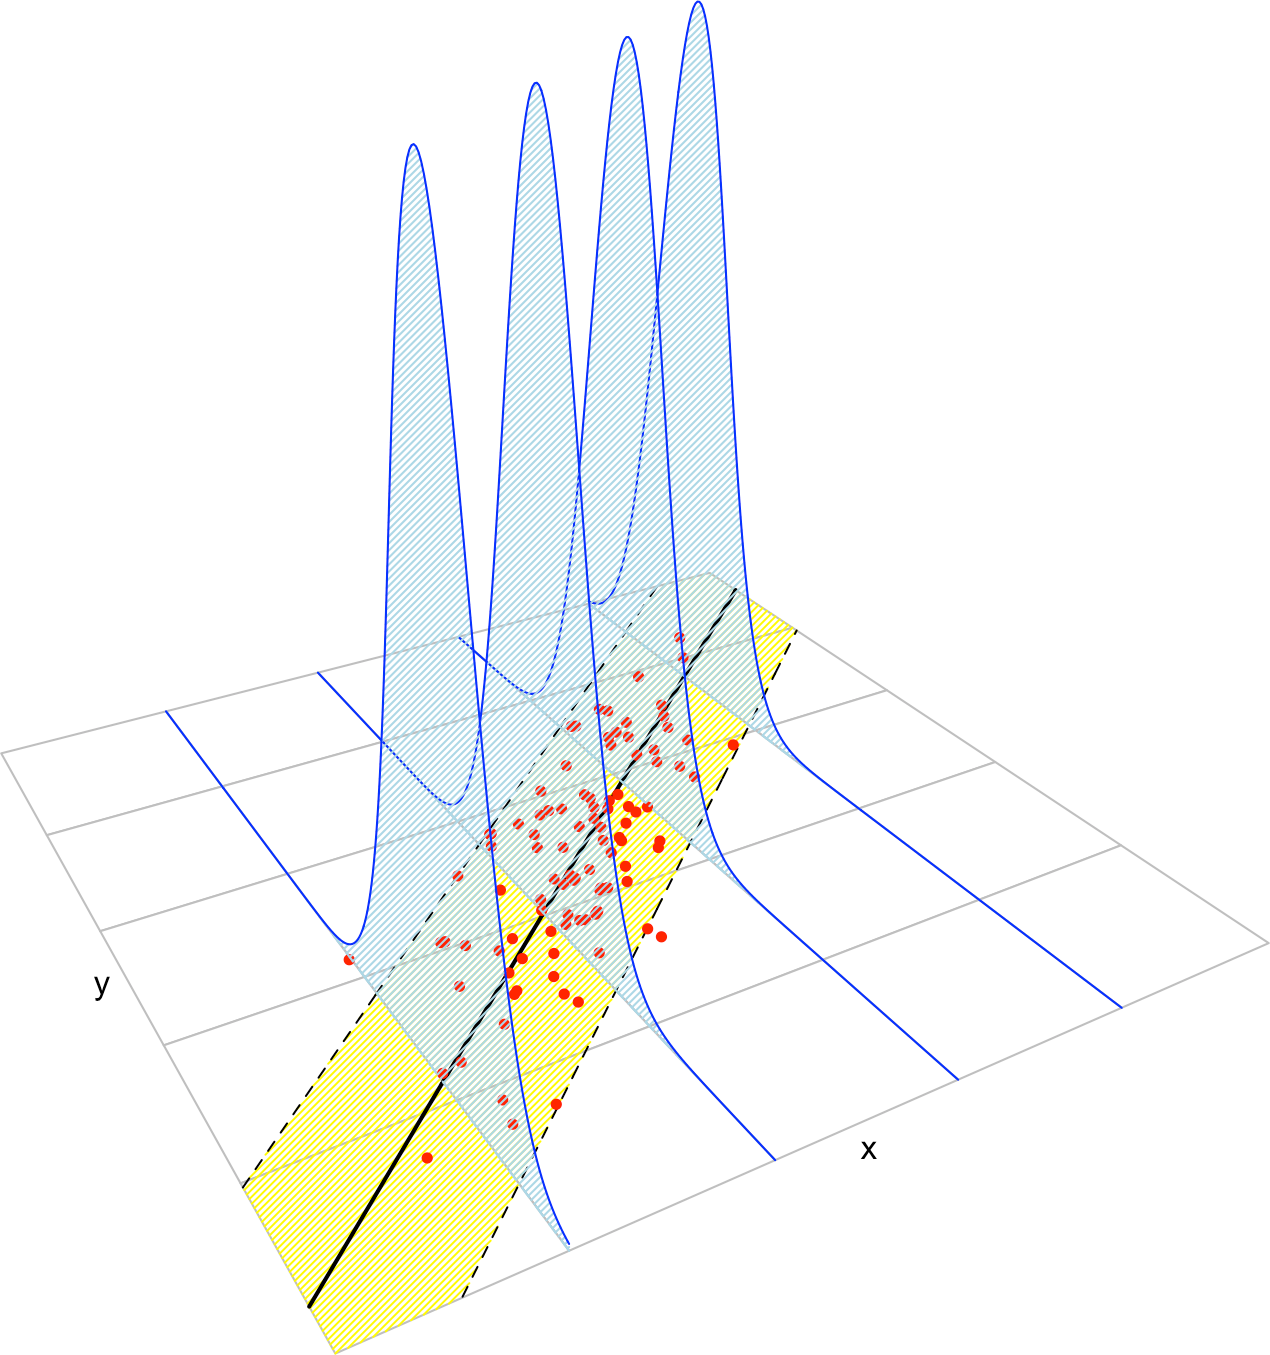 The key concepts of the simple linear model. The blue densities denote the conditional density of \(Y\) for each cut in the \(X\) axis. The yellow band denotes where the \(95\%\) of the data is, according to the model. The red points represent data following the model.